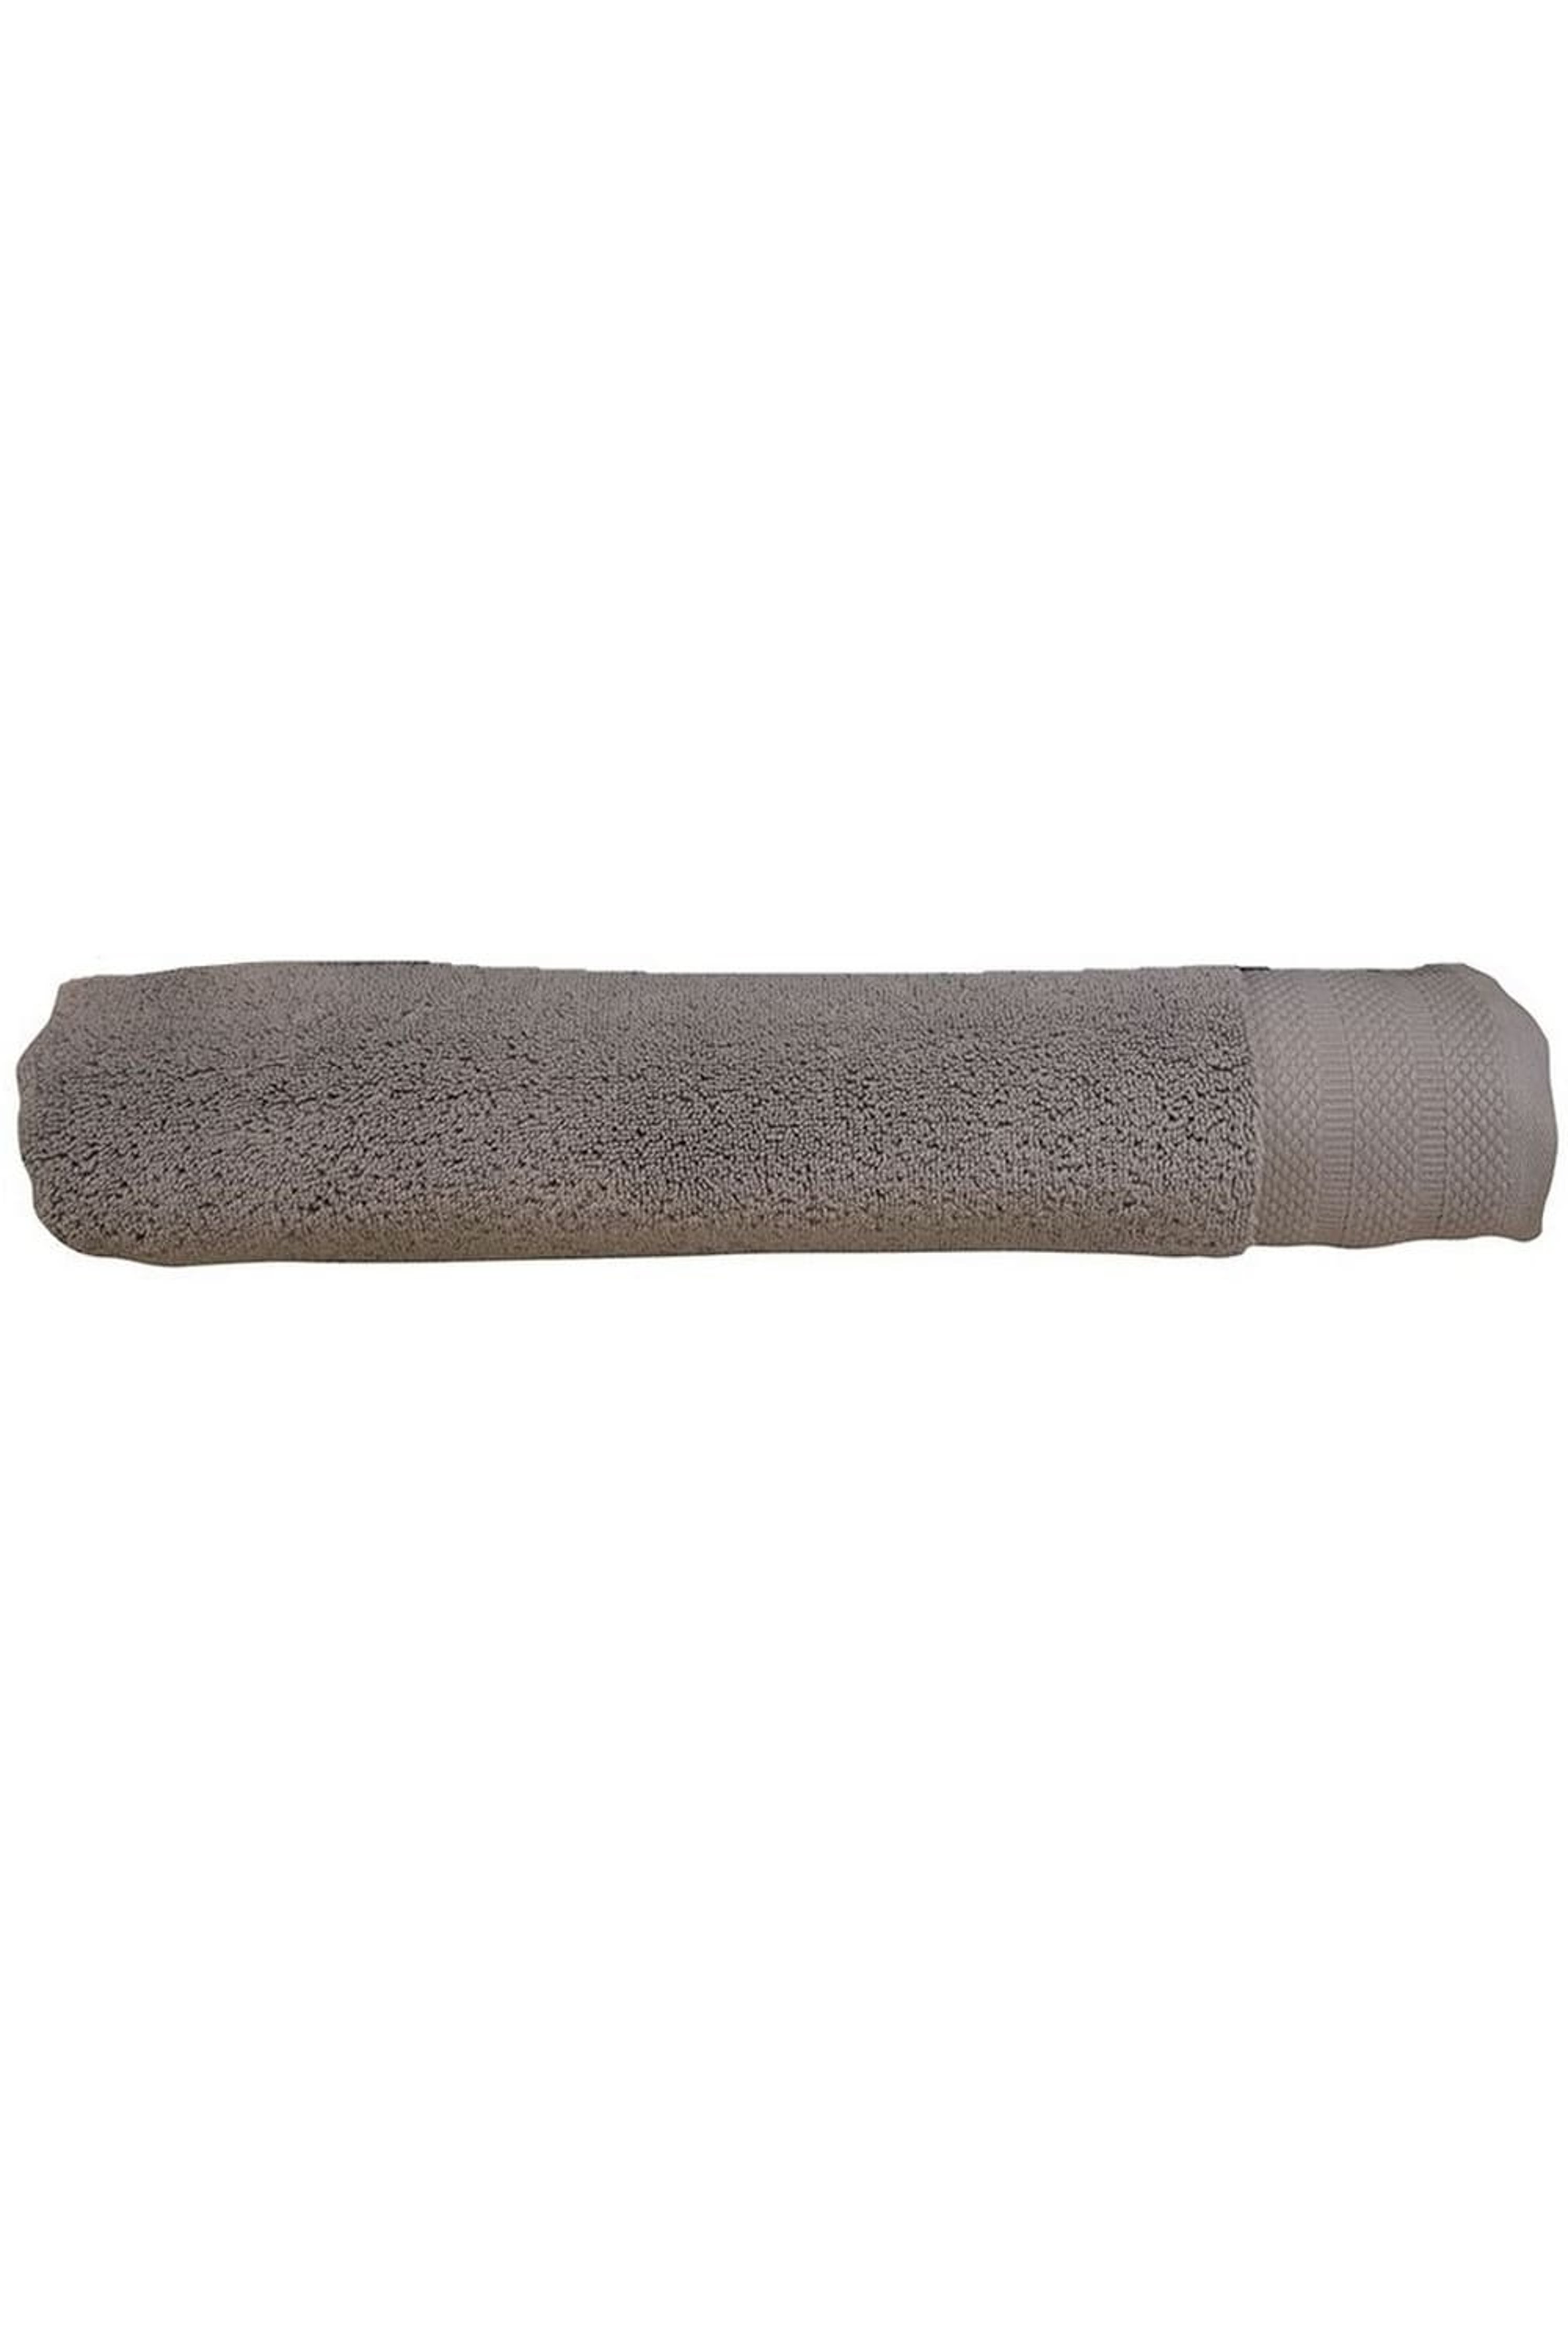 A&R TOWELS A&R TOWELS A&R TOWELS PURE LUXE BATH TOWEL (PURE GRAY) (ONE SIZE)